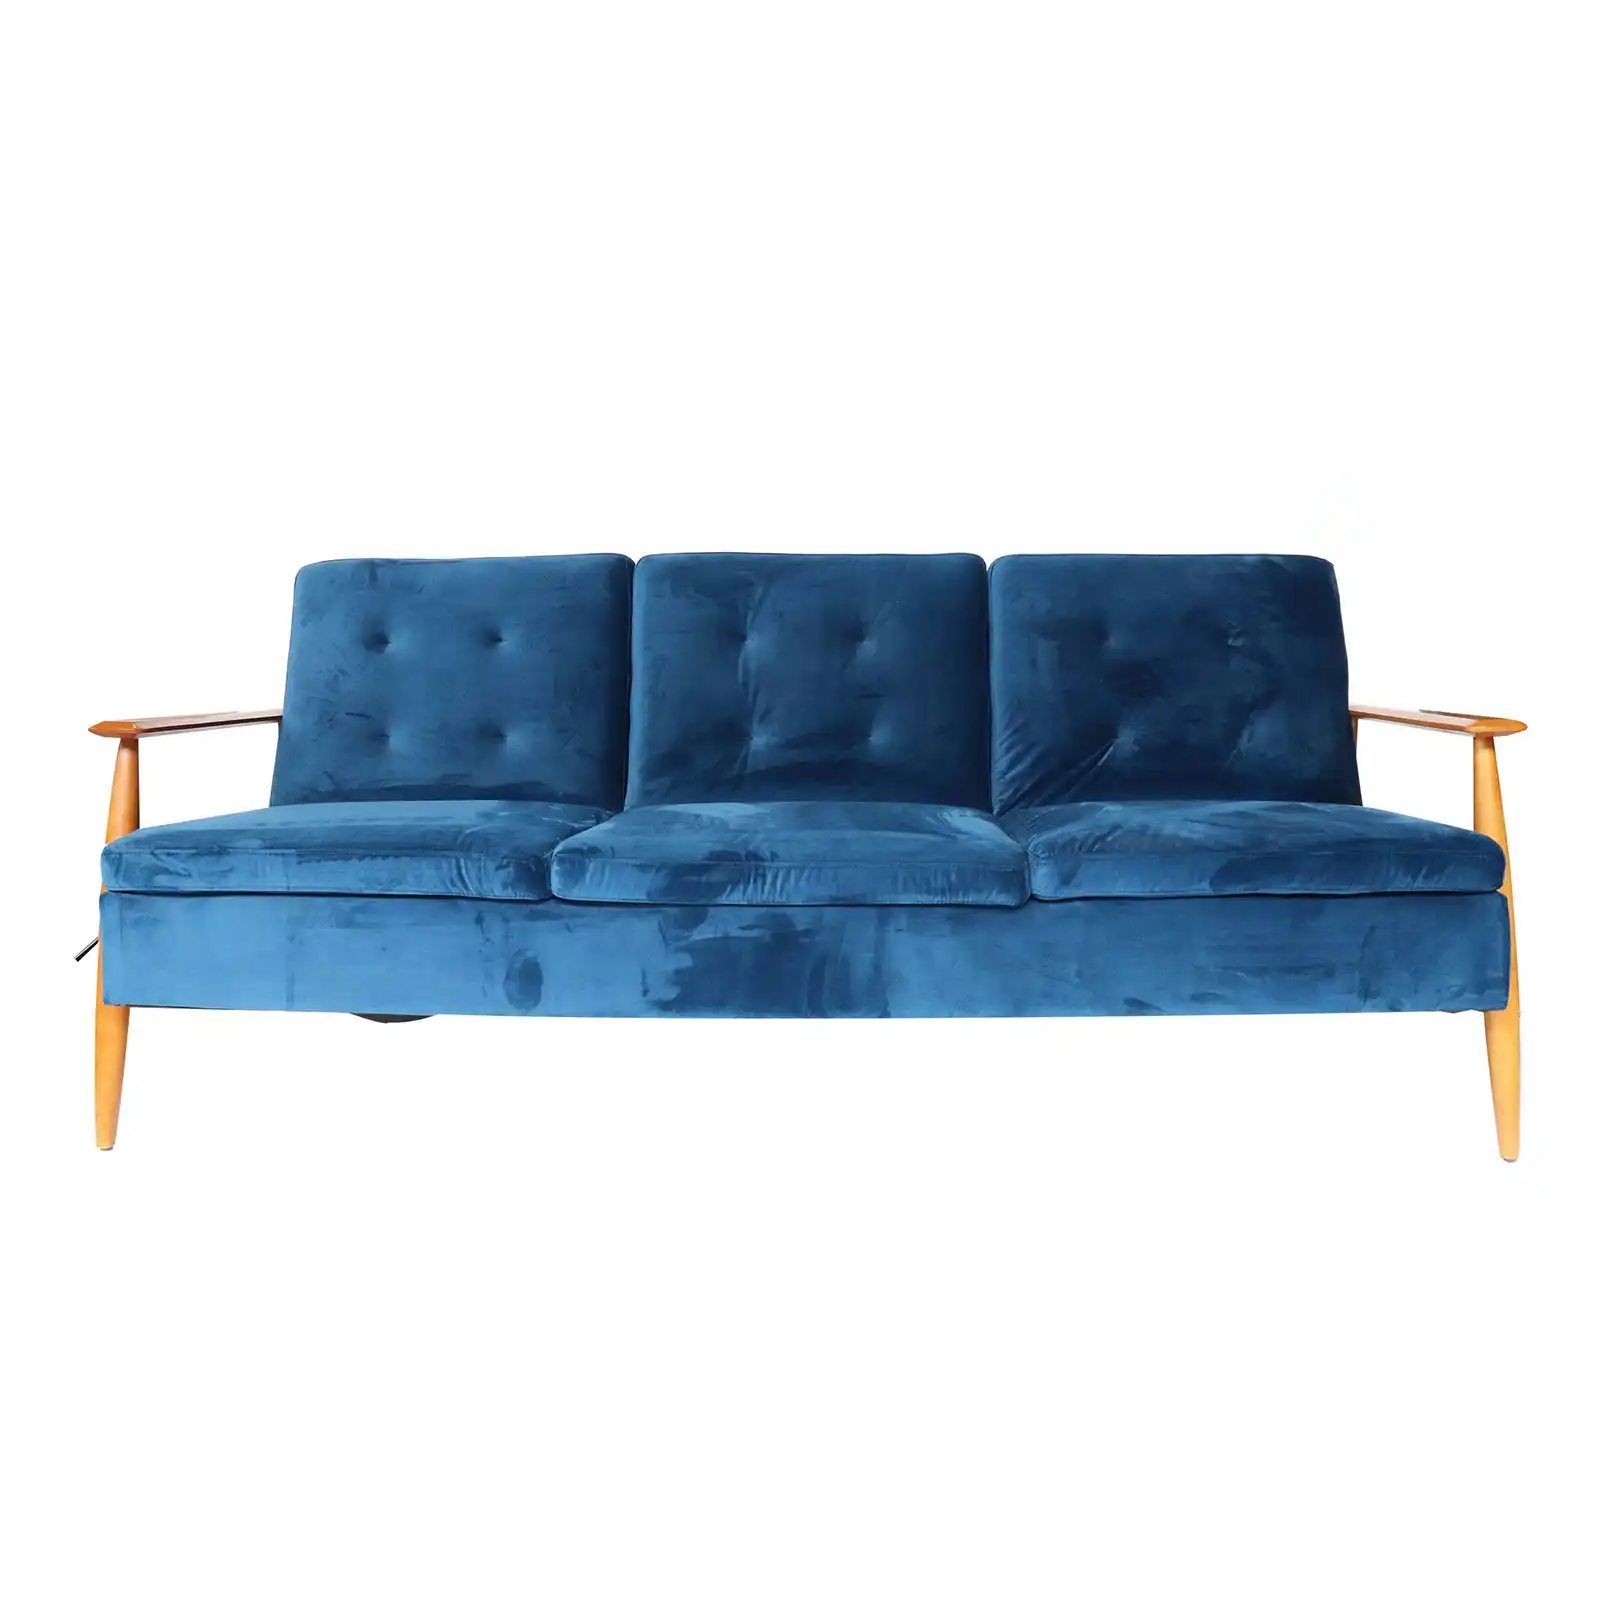 Lindy Timber arm Sofa Bed (Blue)